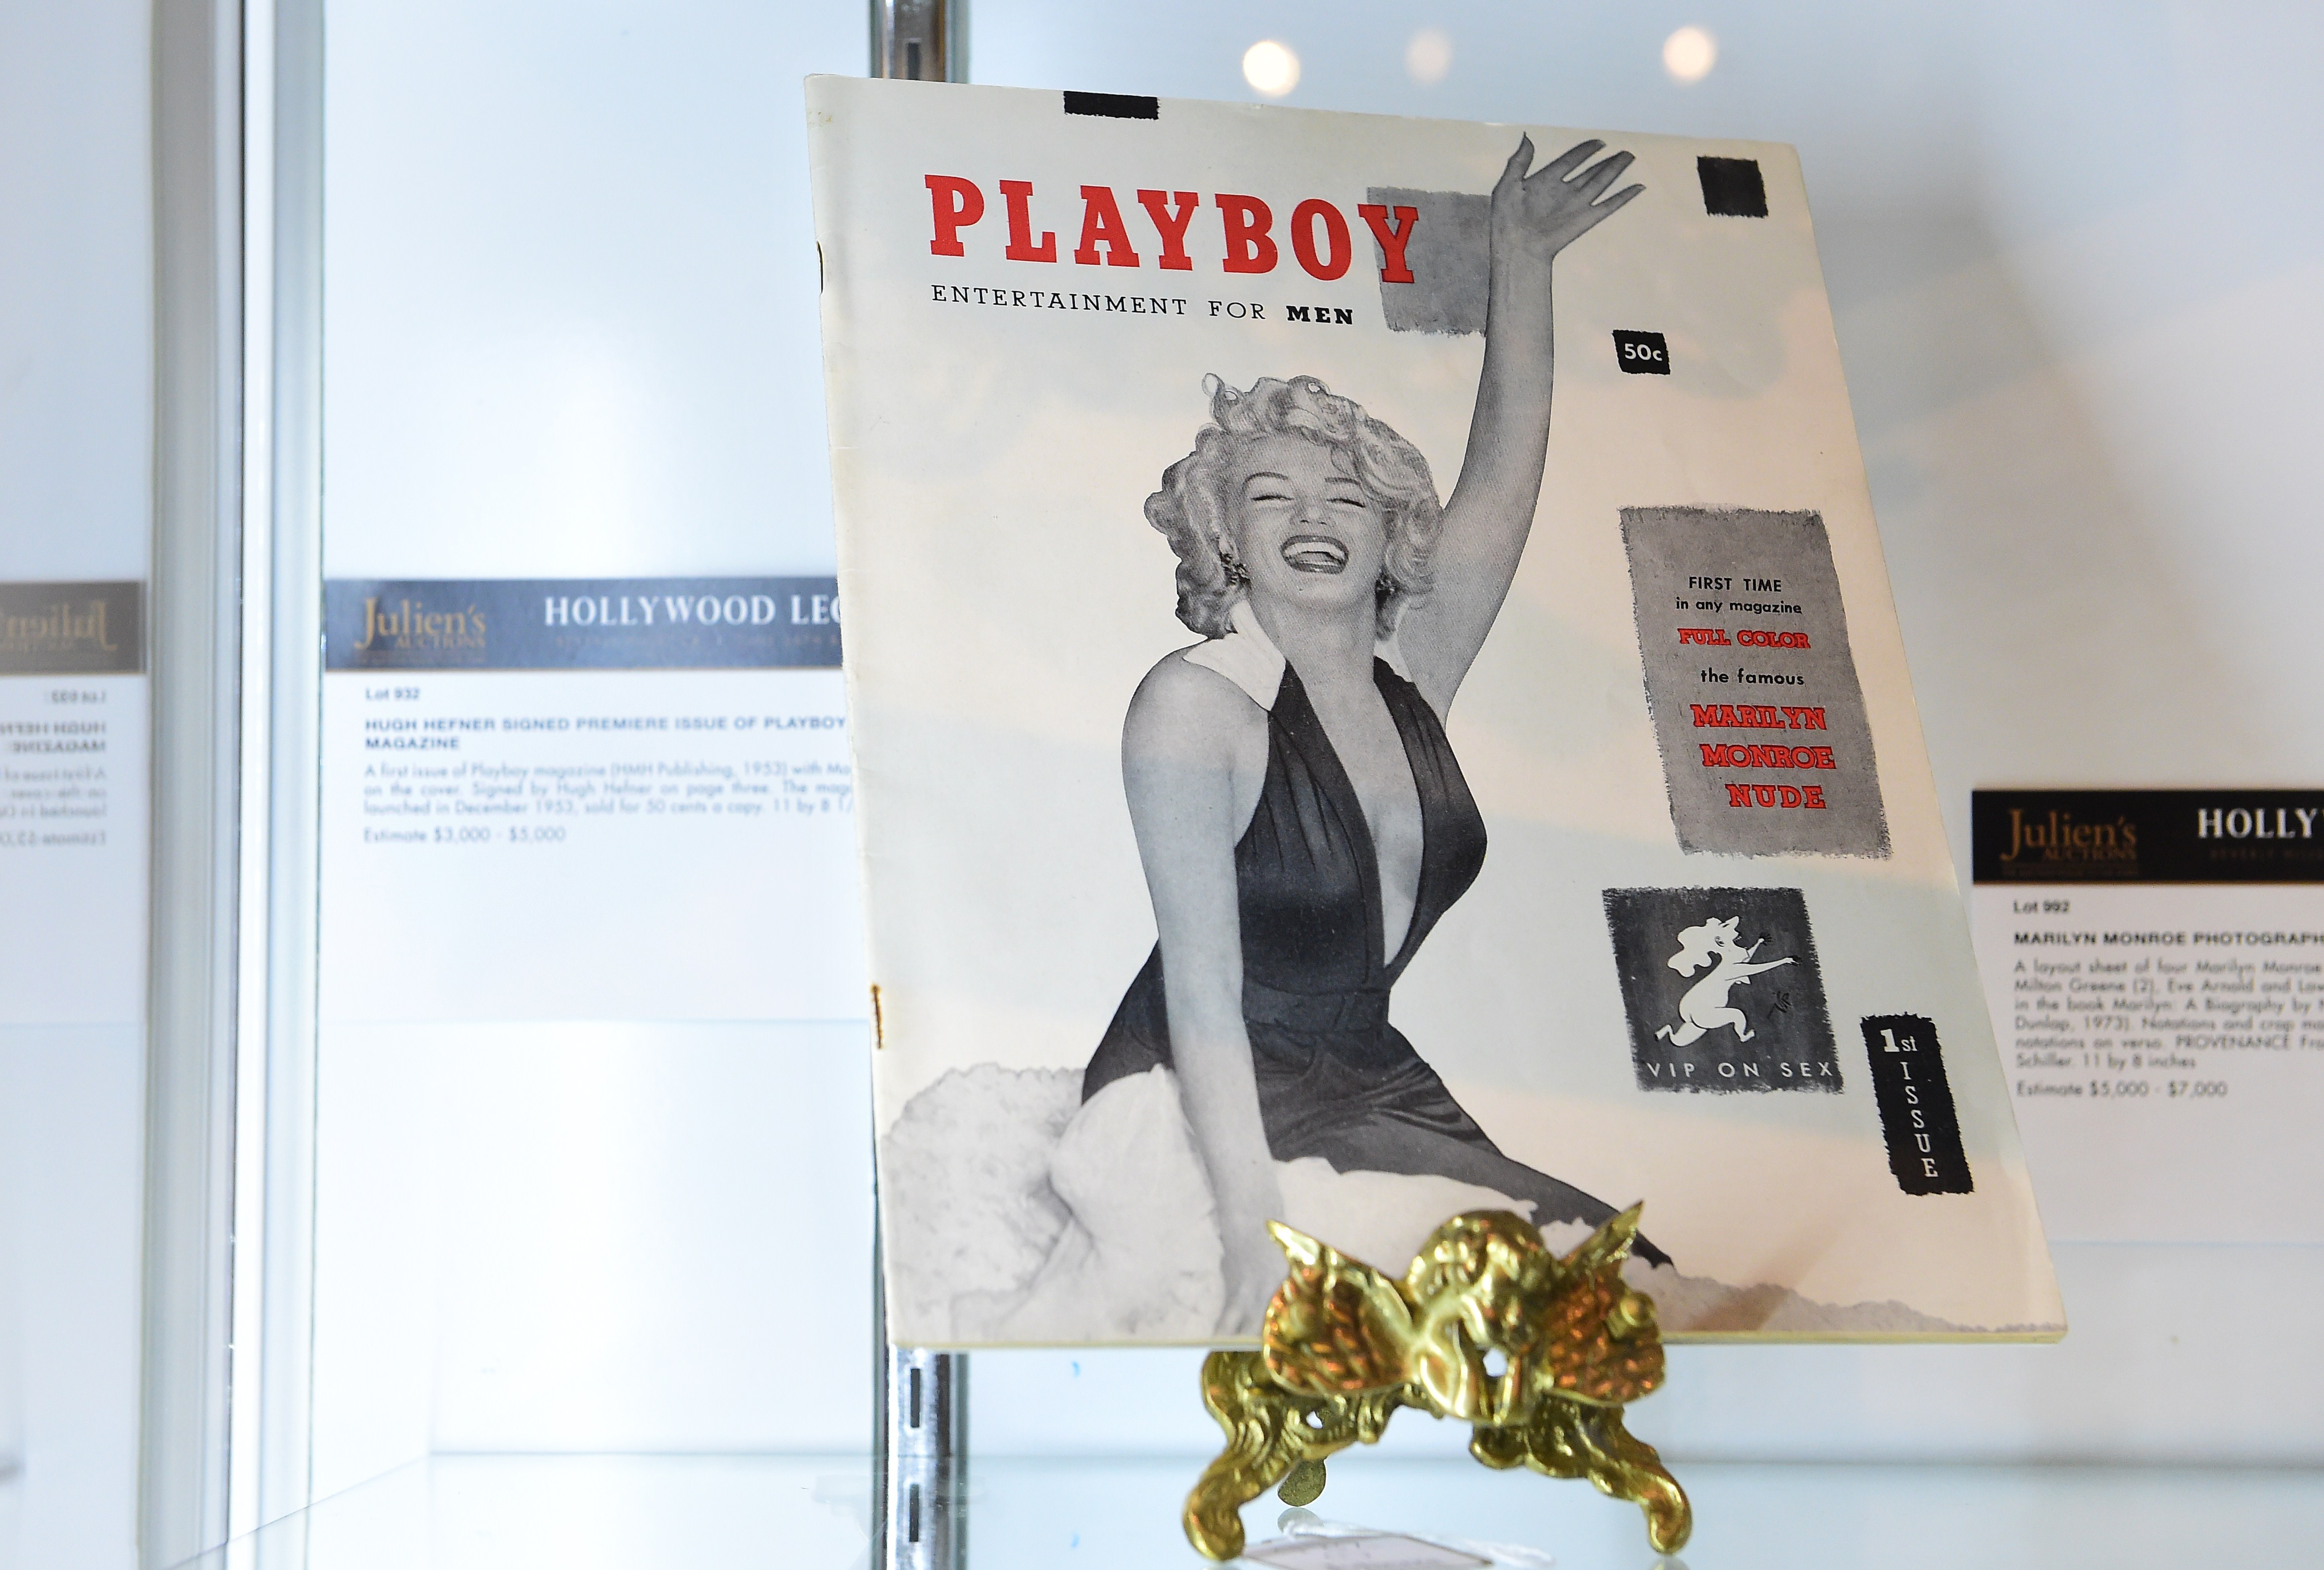 christian tyson recommends best playboy photos of all time pic